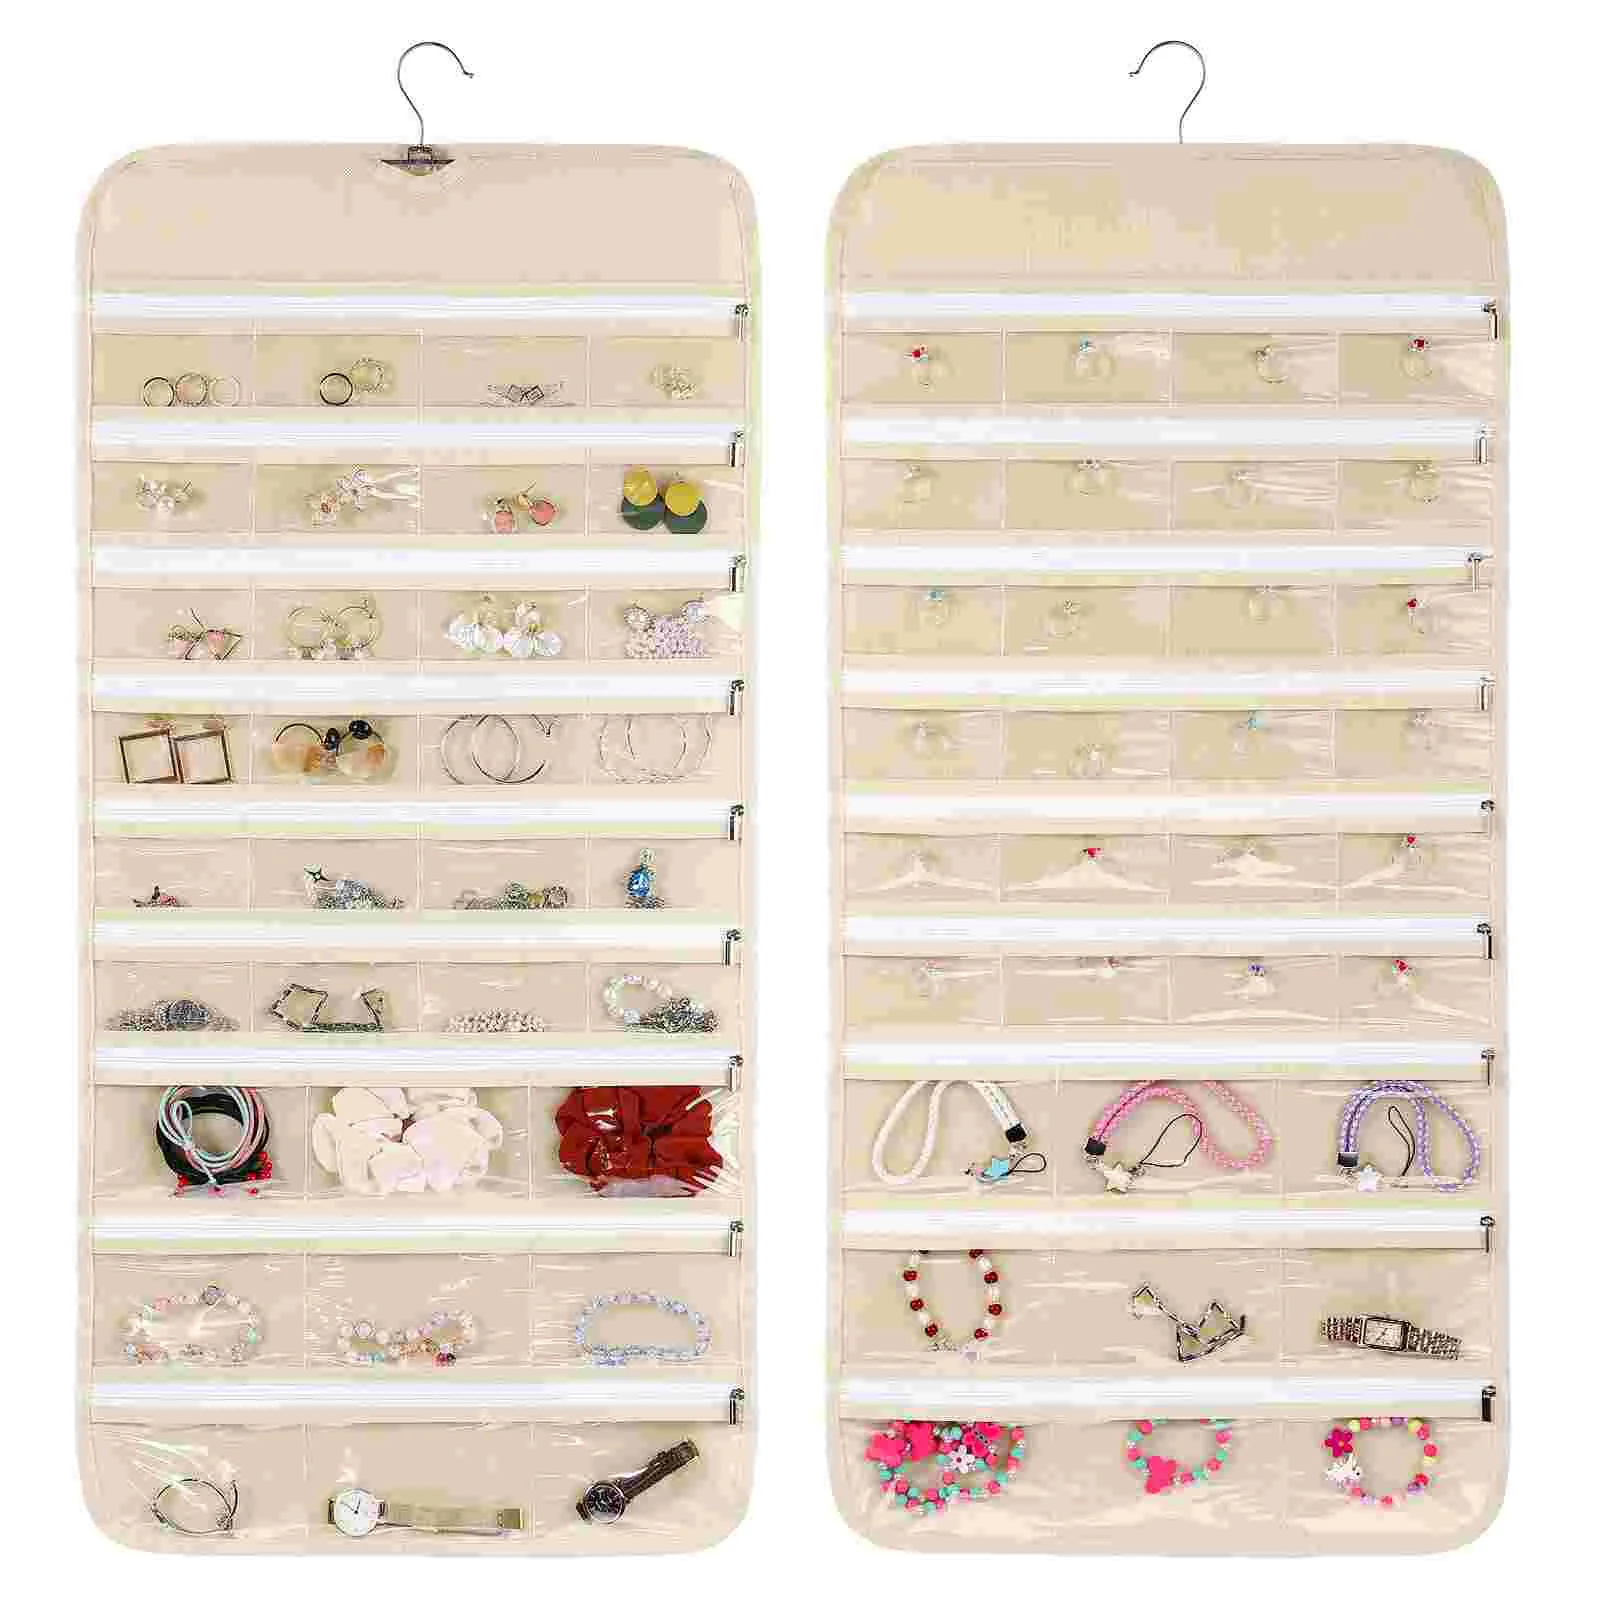 

Organizer Jewelry Hanging Hanger Earring Wall Holder Stand Storage Pocket Necklace Over The Door Container Bracelet Jewlwey